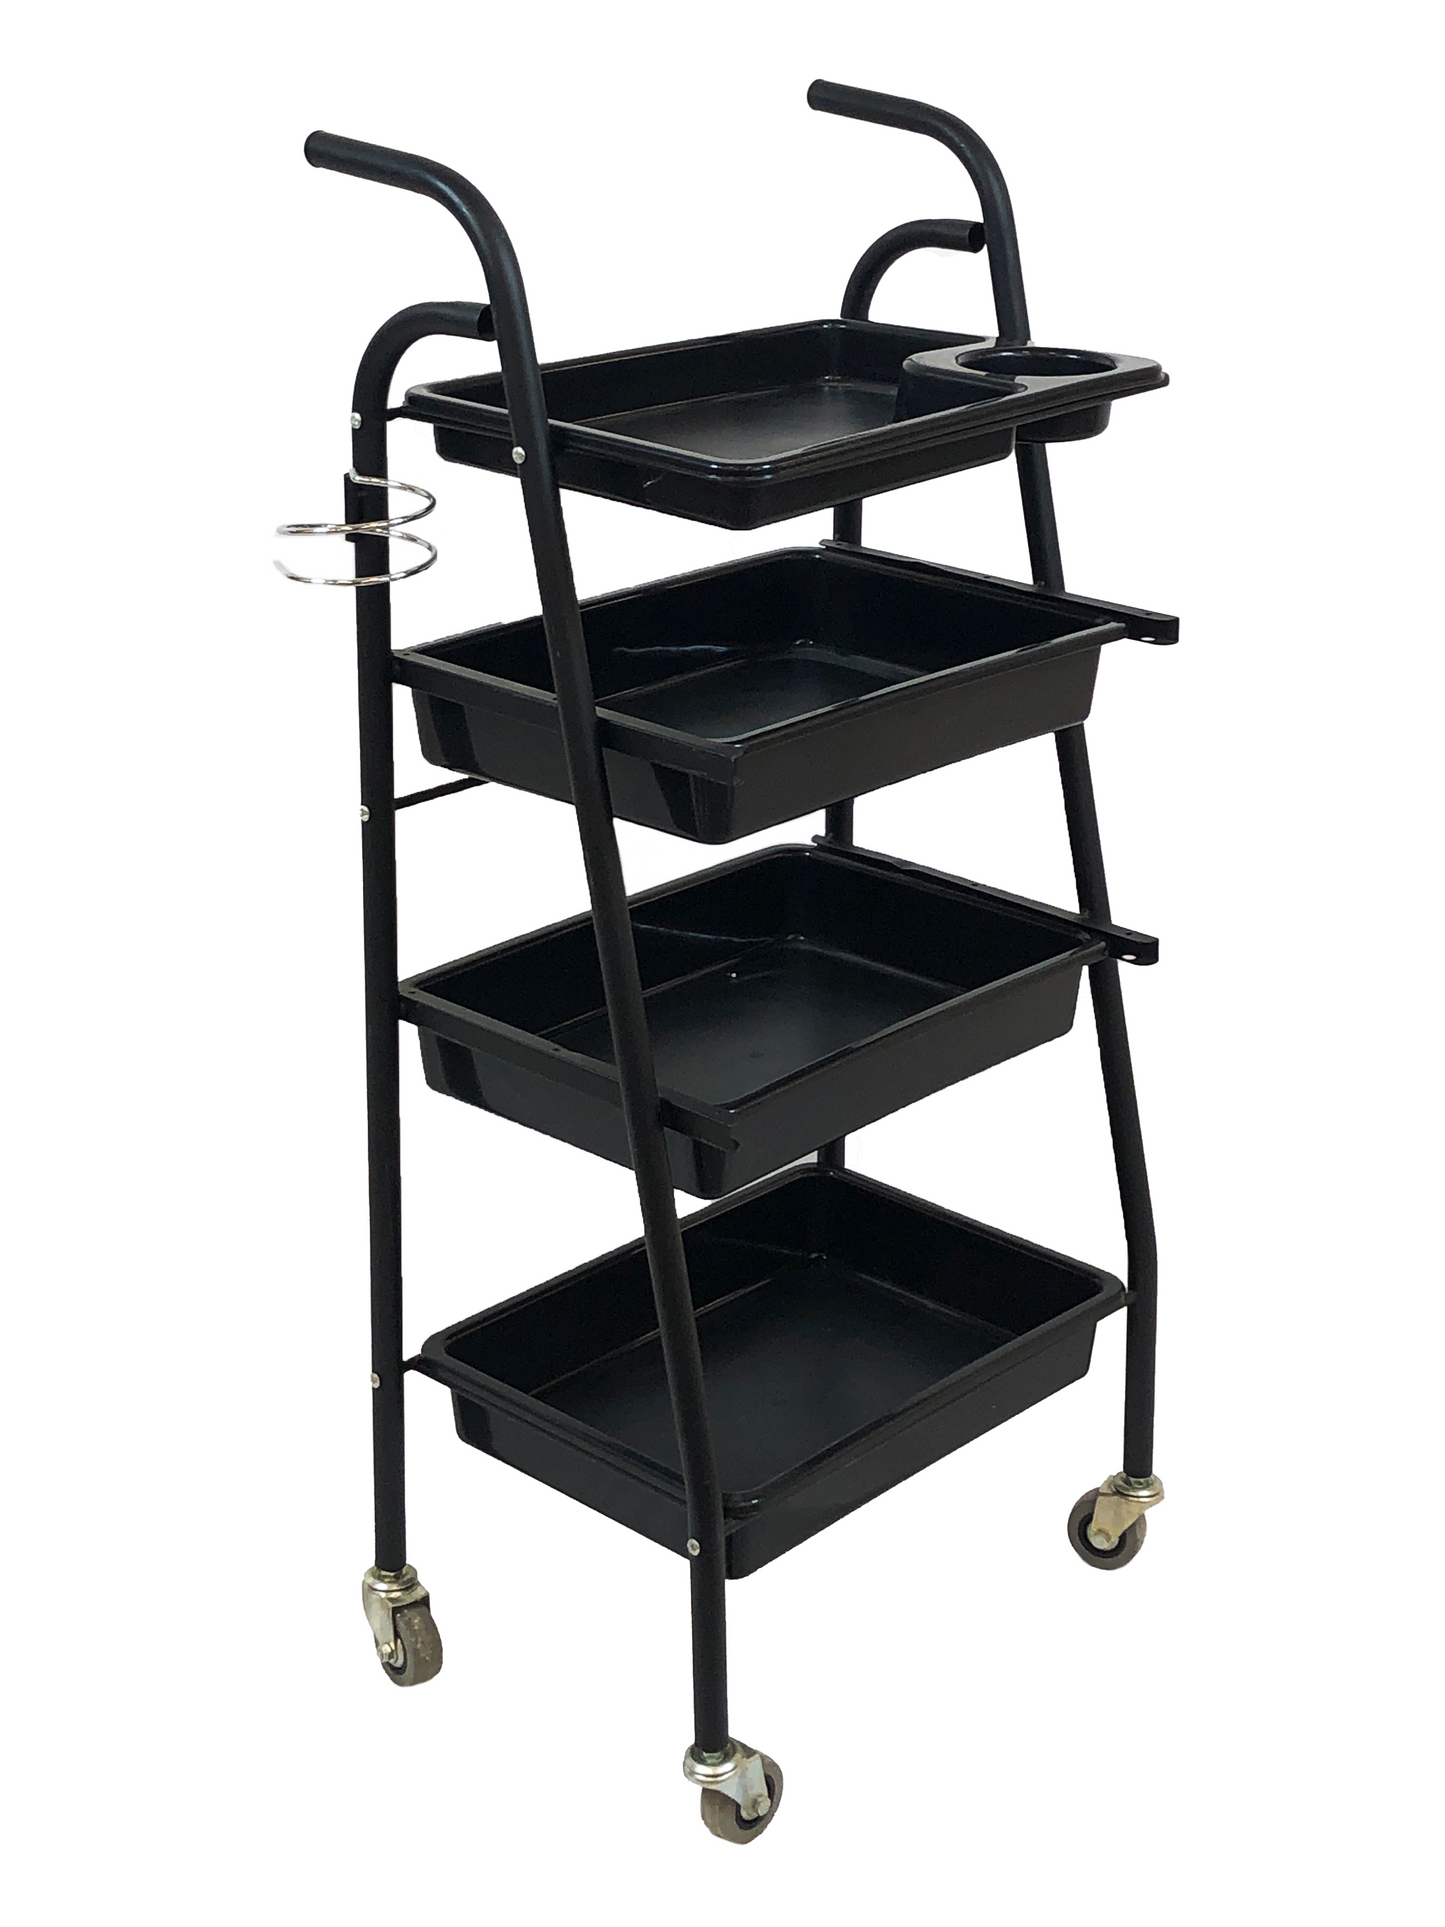 AUXILIARY CART FOR HAIRDRESSER AND BARBERSHOP